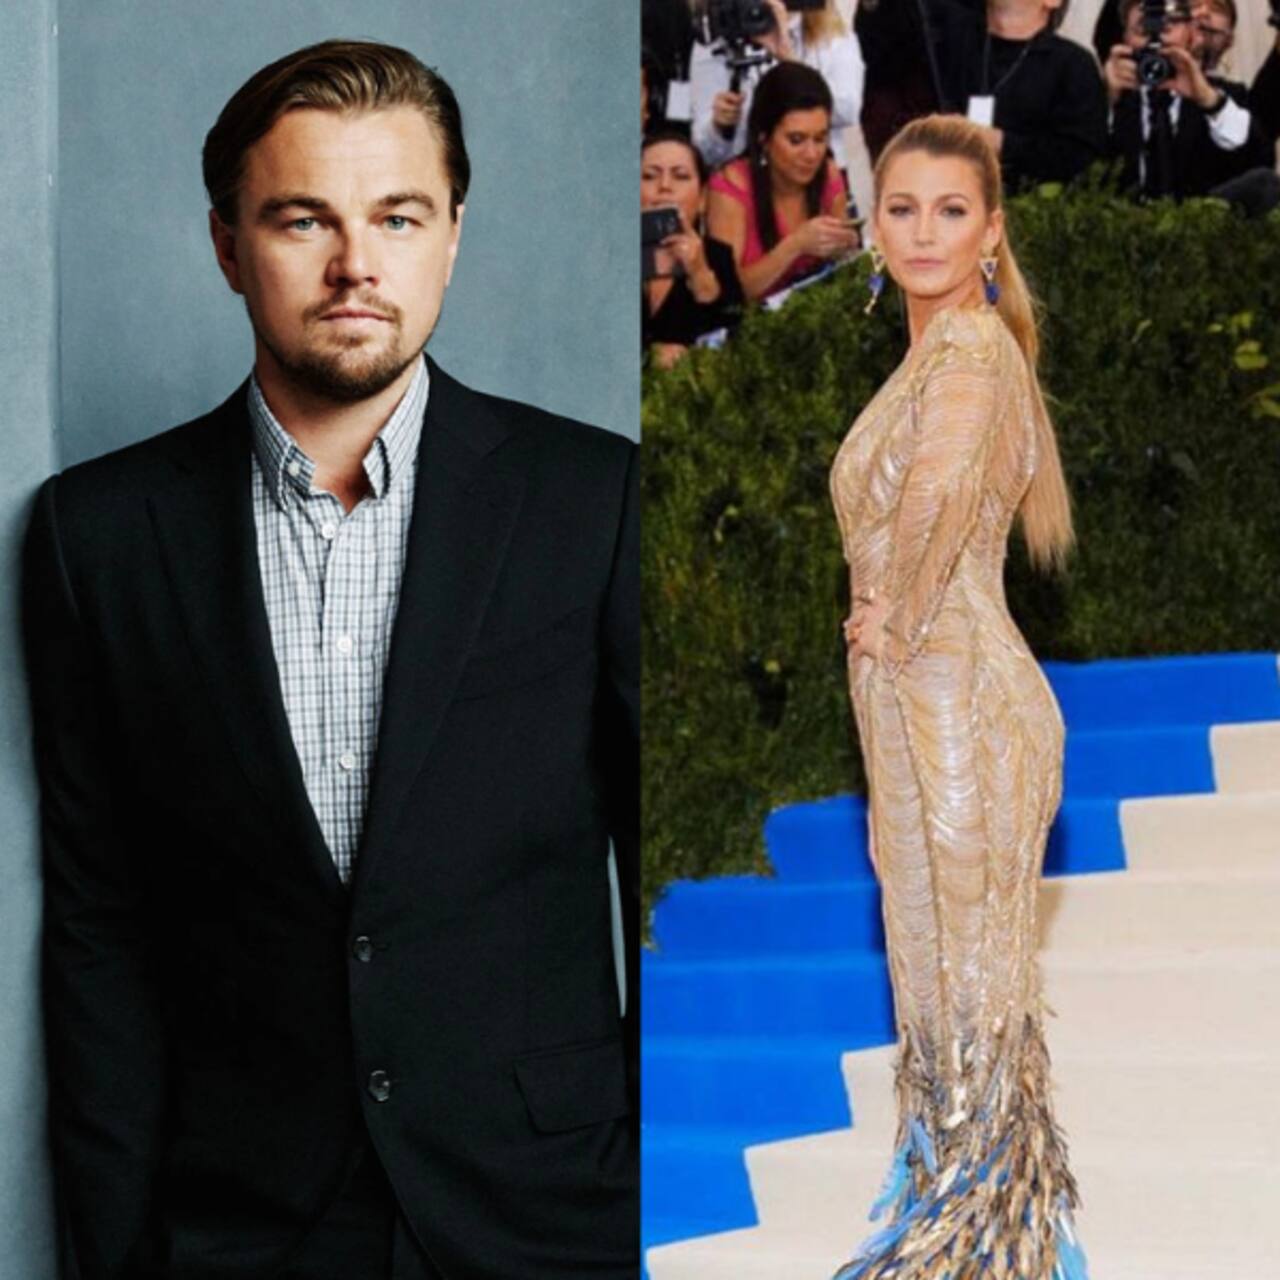 Leonardo DiCaprio's dating history with young women: Blake Lively